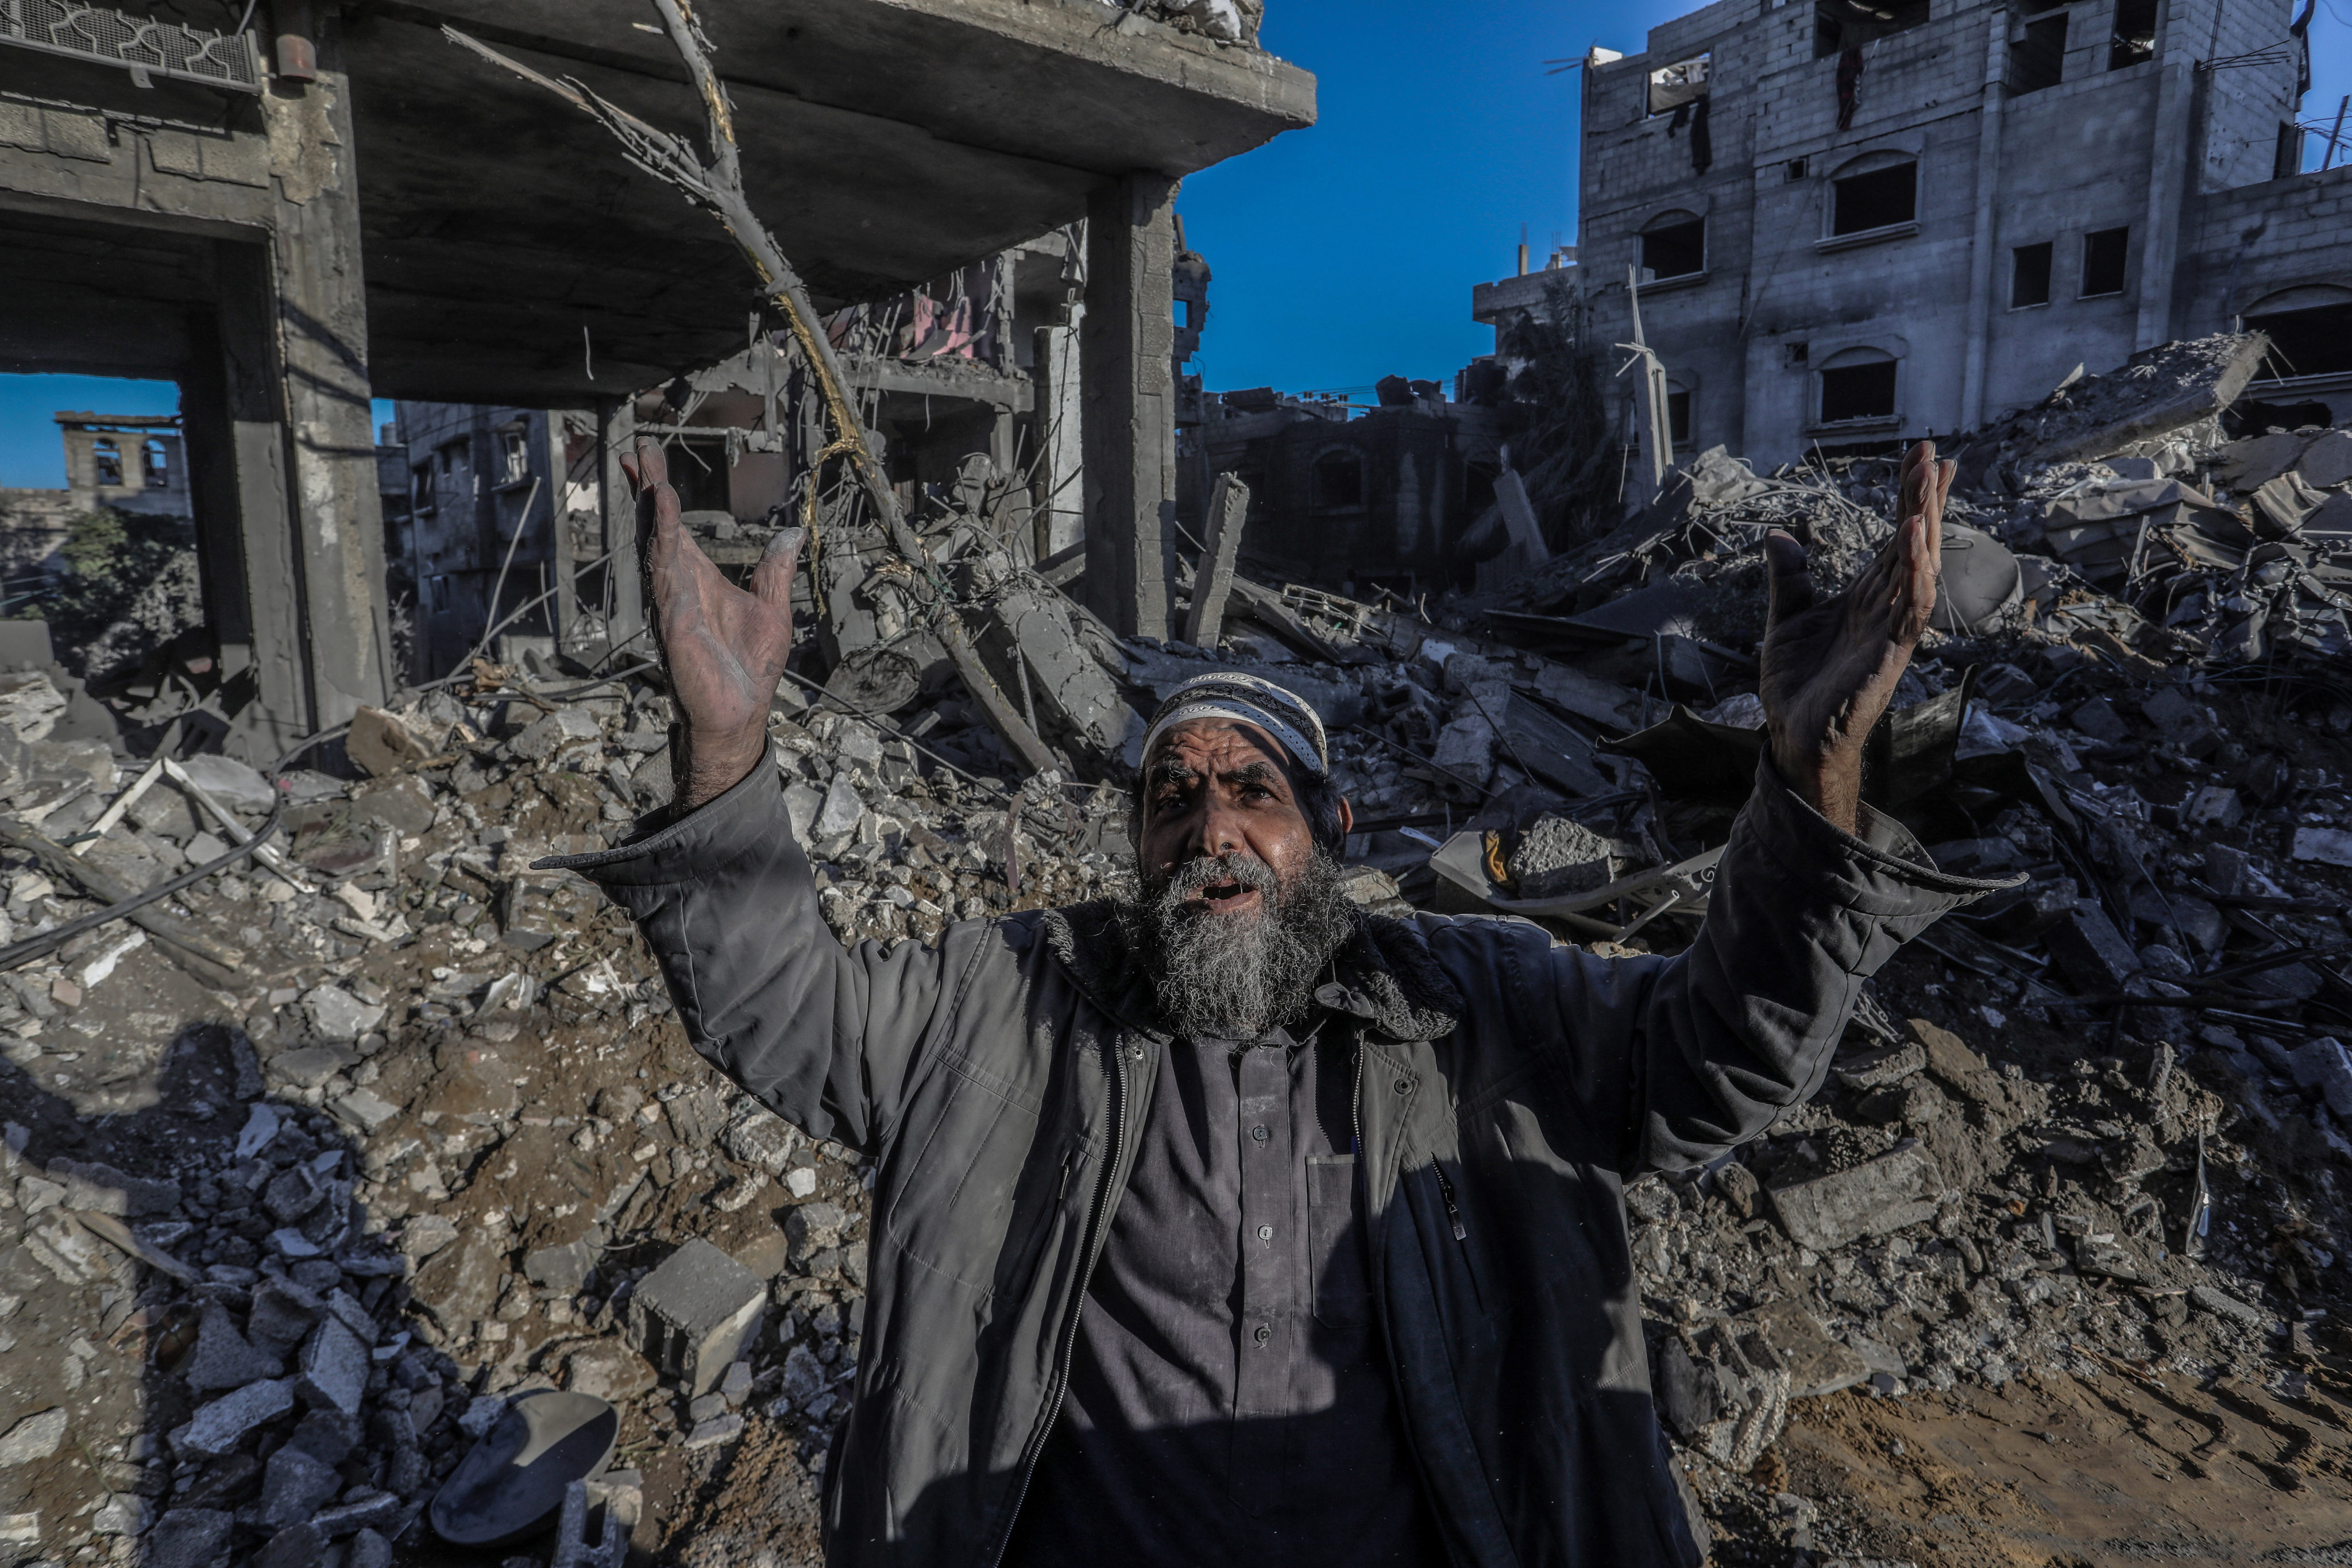 A Palestinian man reacts after an Israeli air strike on a house in the city of Rafah in the southern Gaza Strip. Photo: dpa